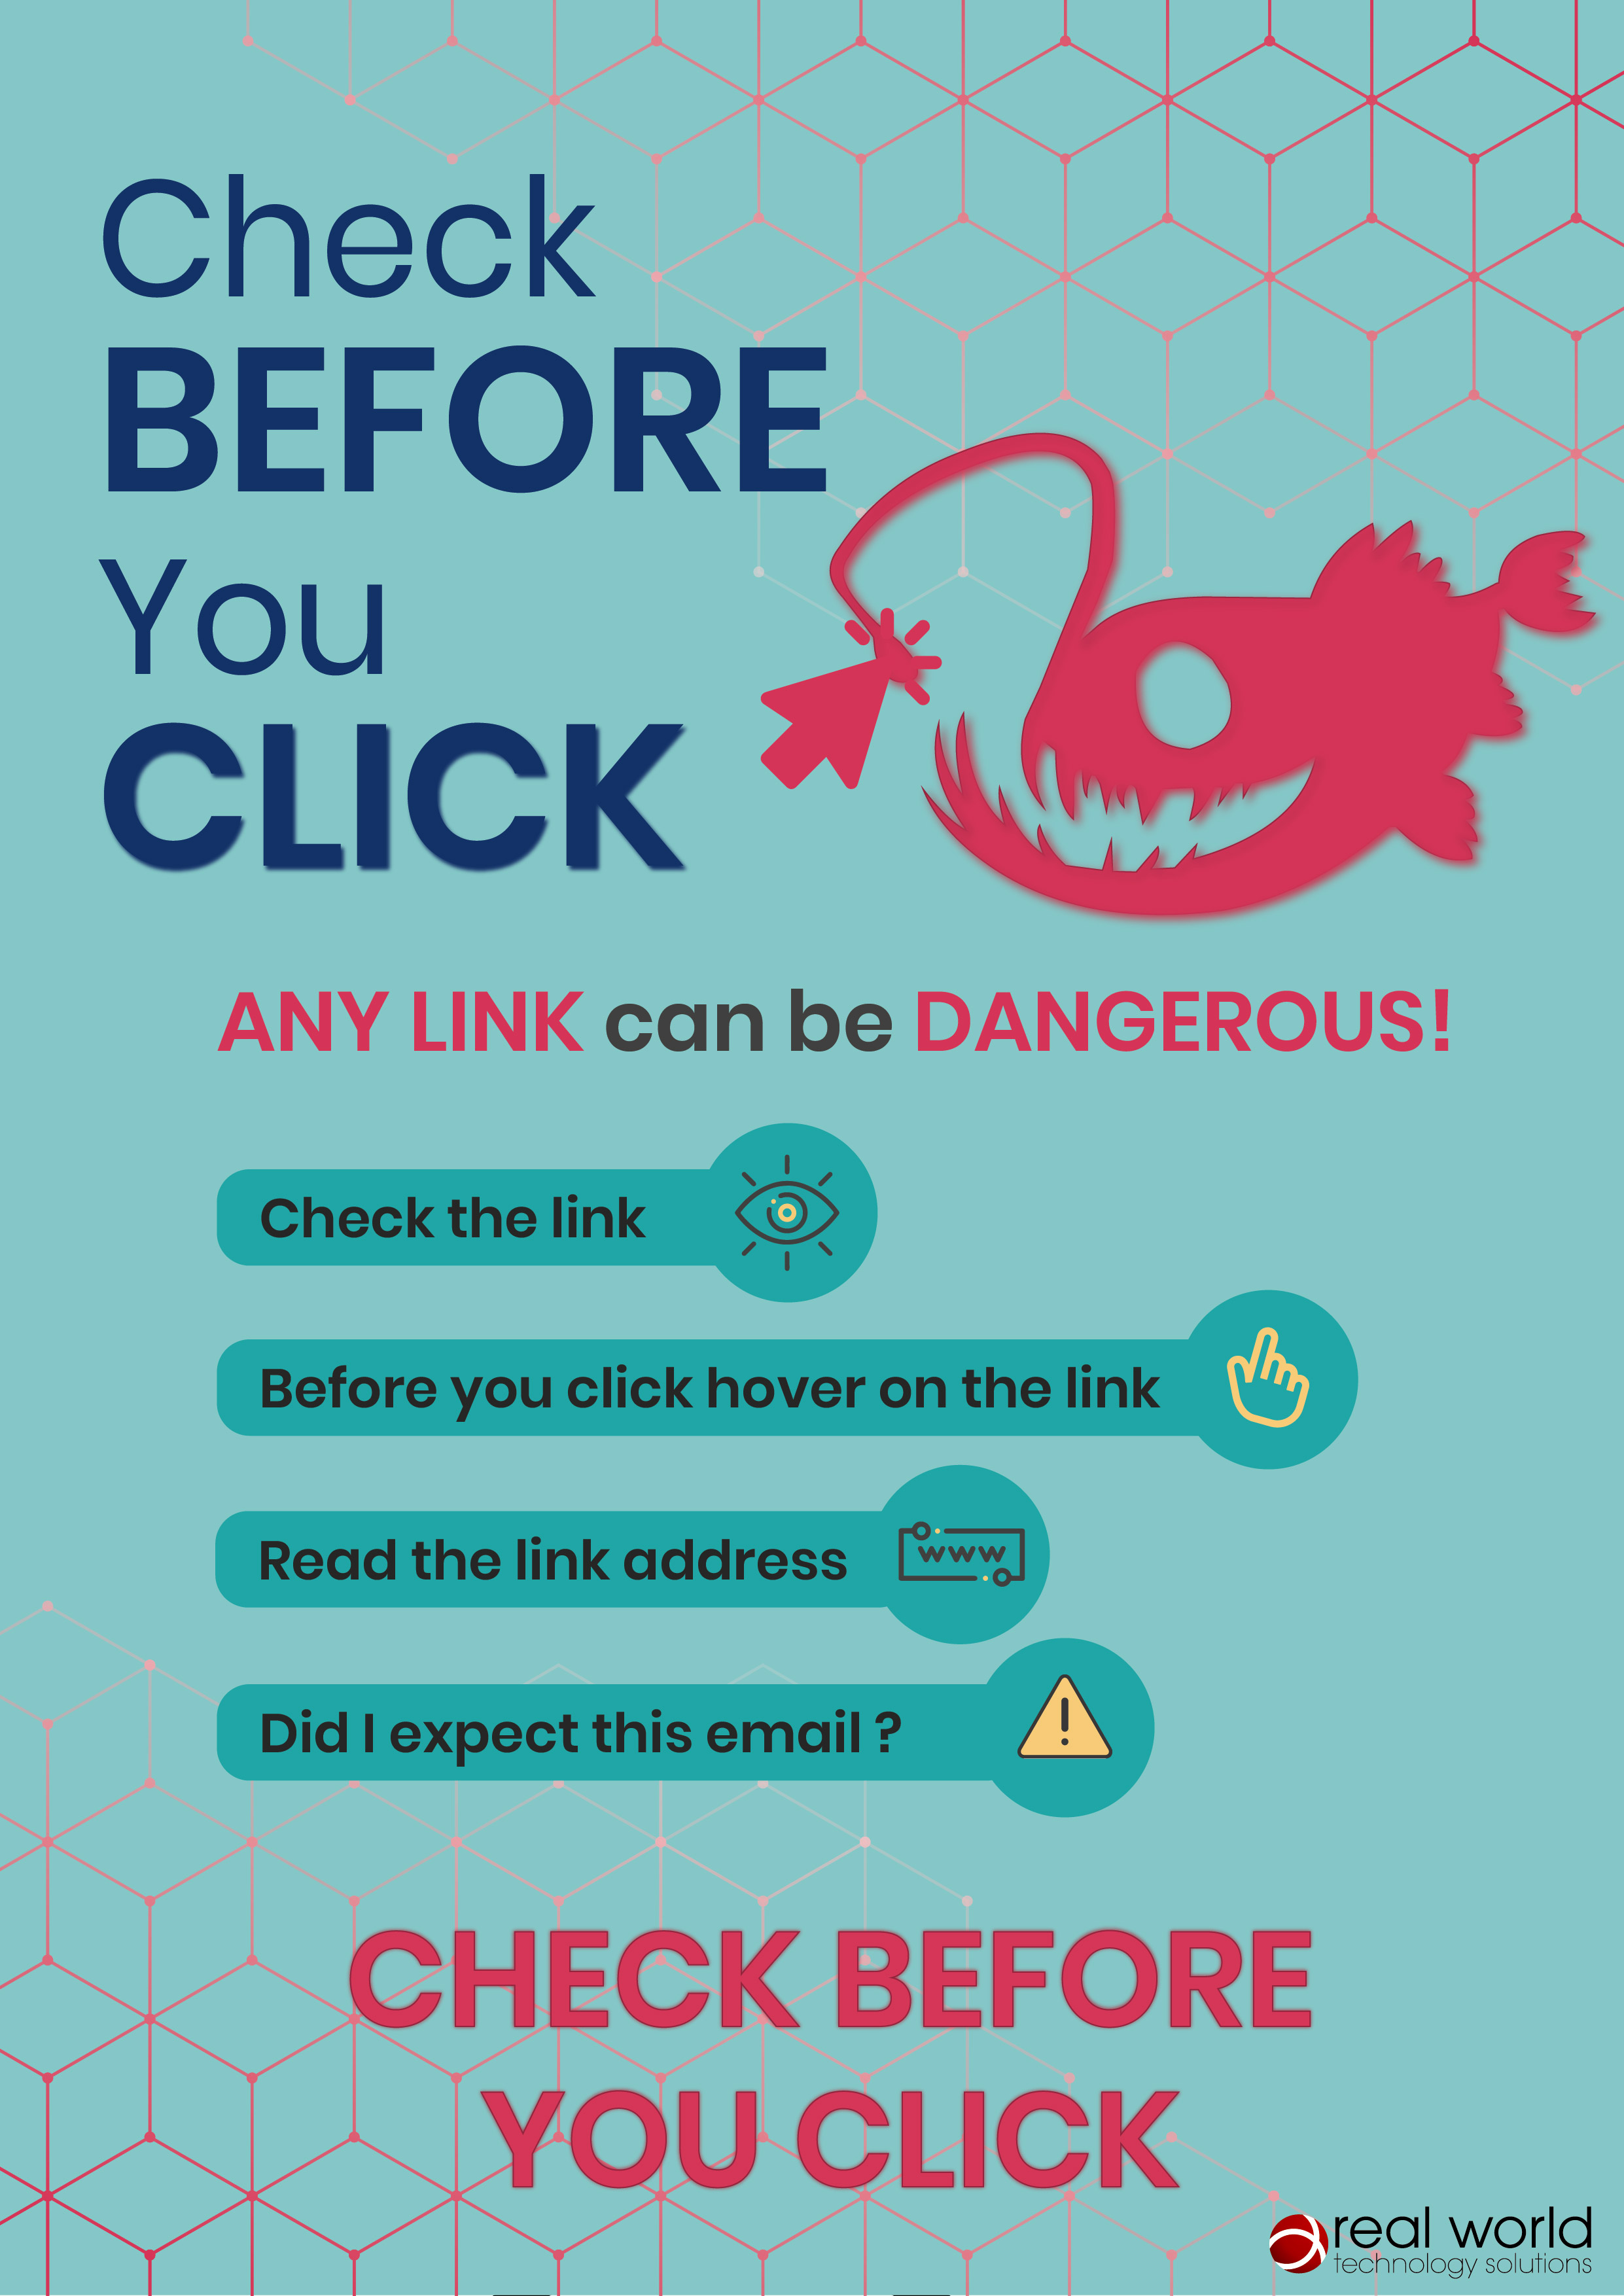 Check_before_you_click-03-04.jpg